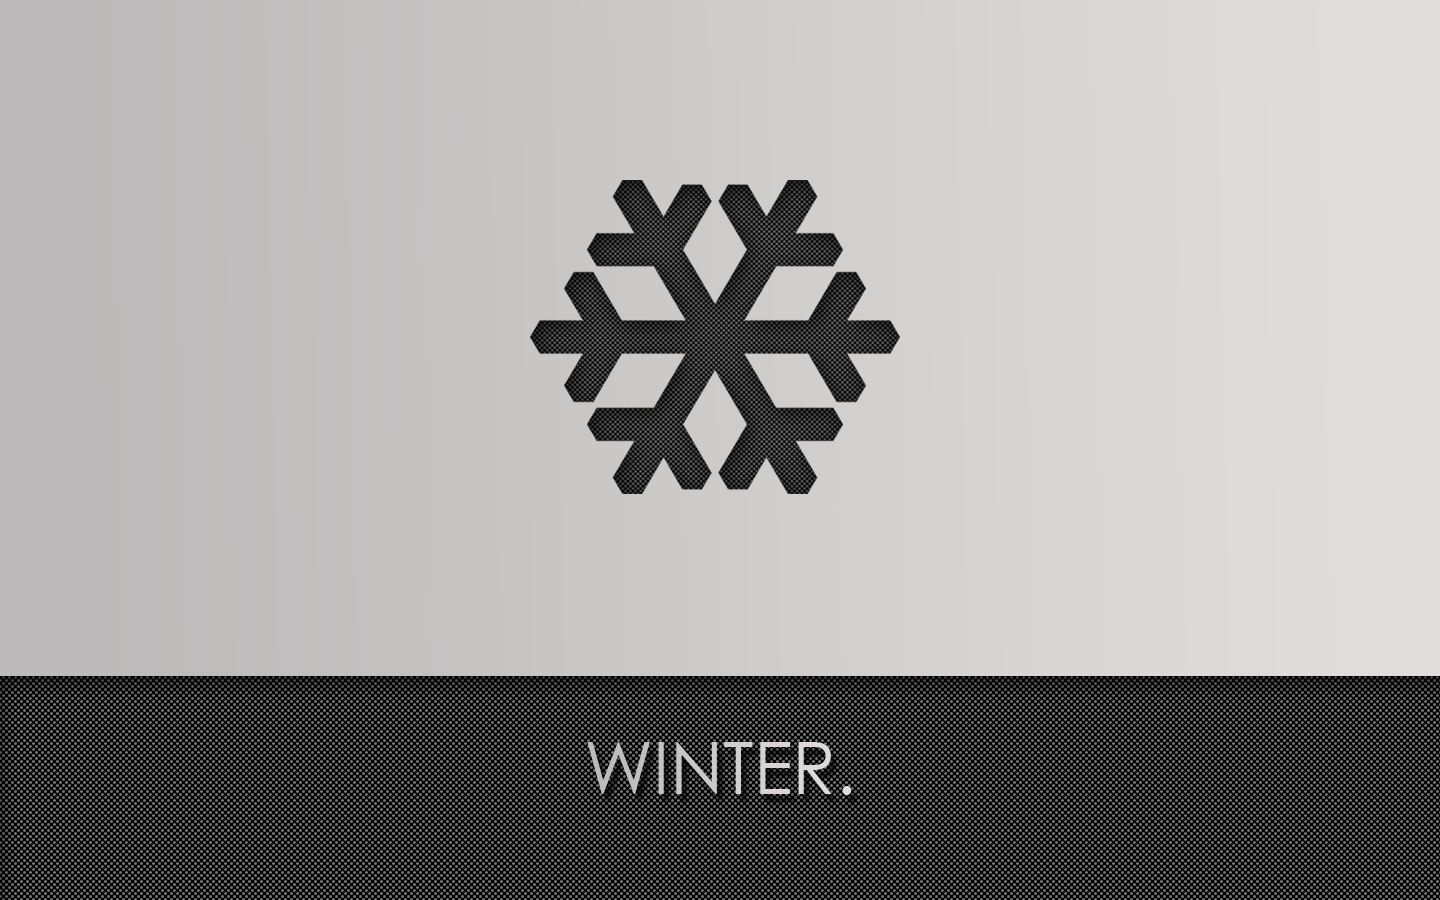 General 1440x900 minimalism monochrome snowflakes abstract simple background winter typography